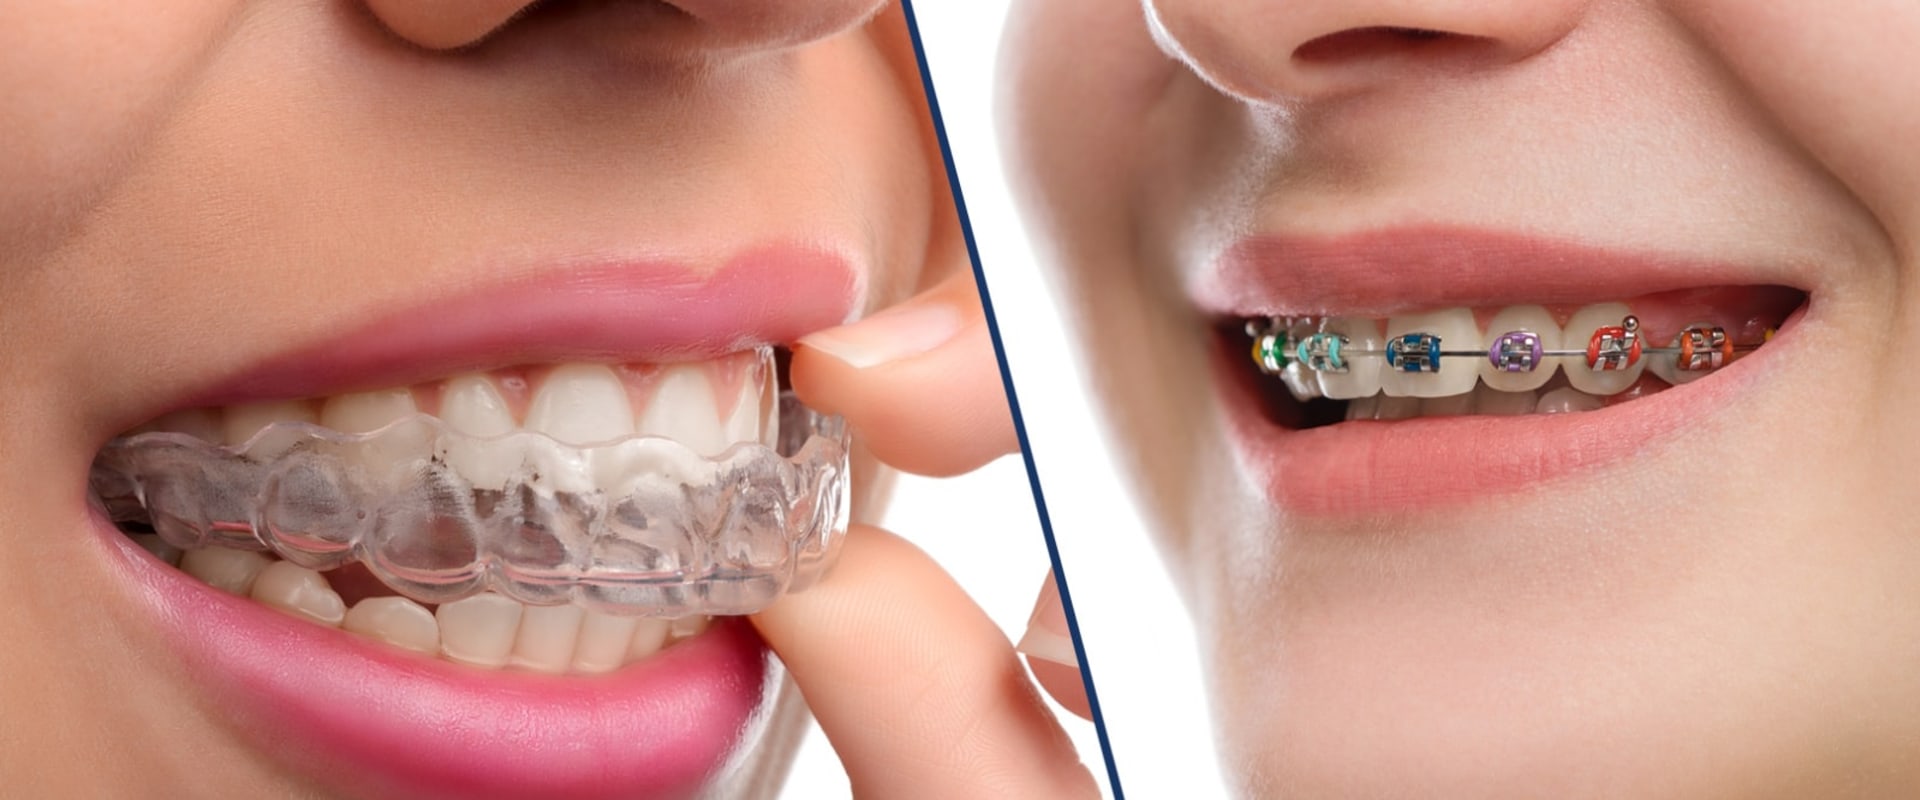 Is Invisalign more expensive than braces?